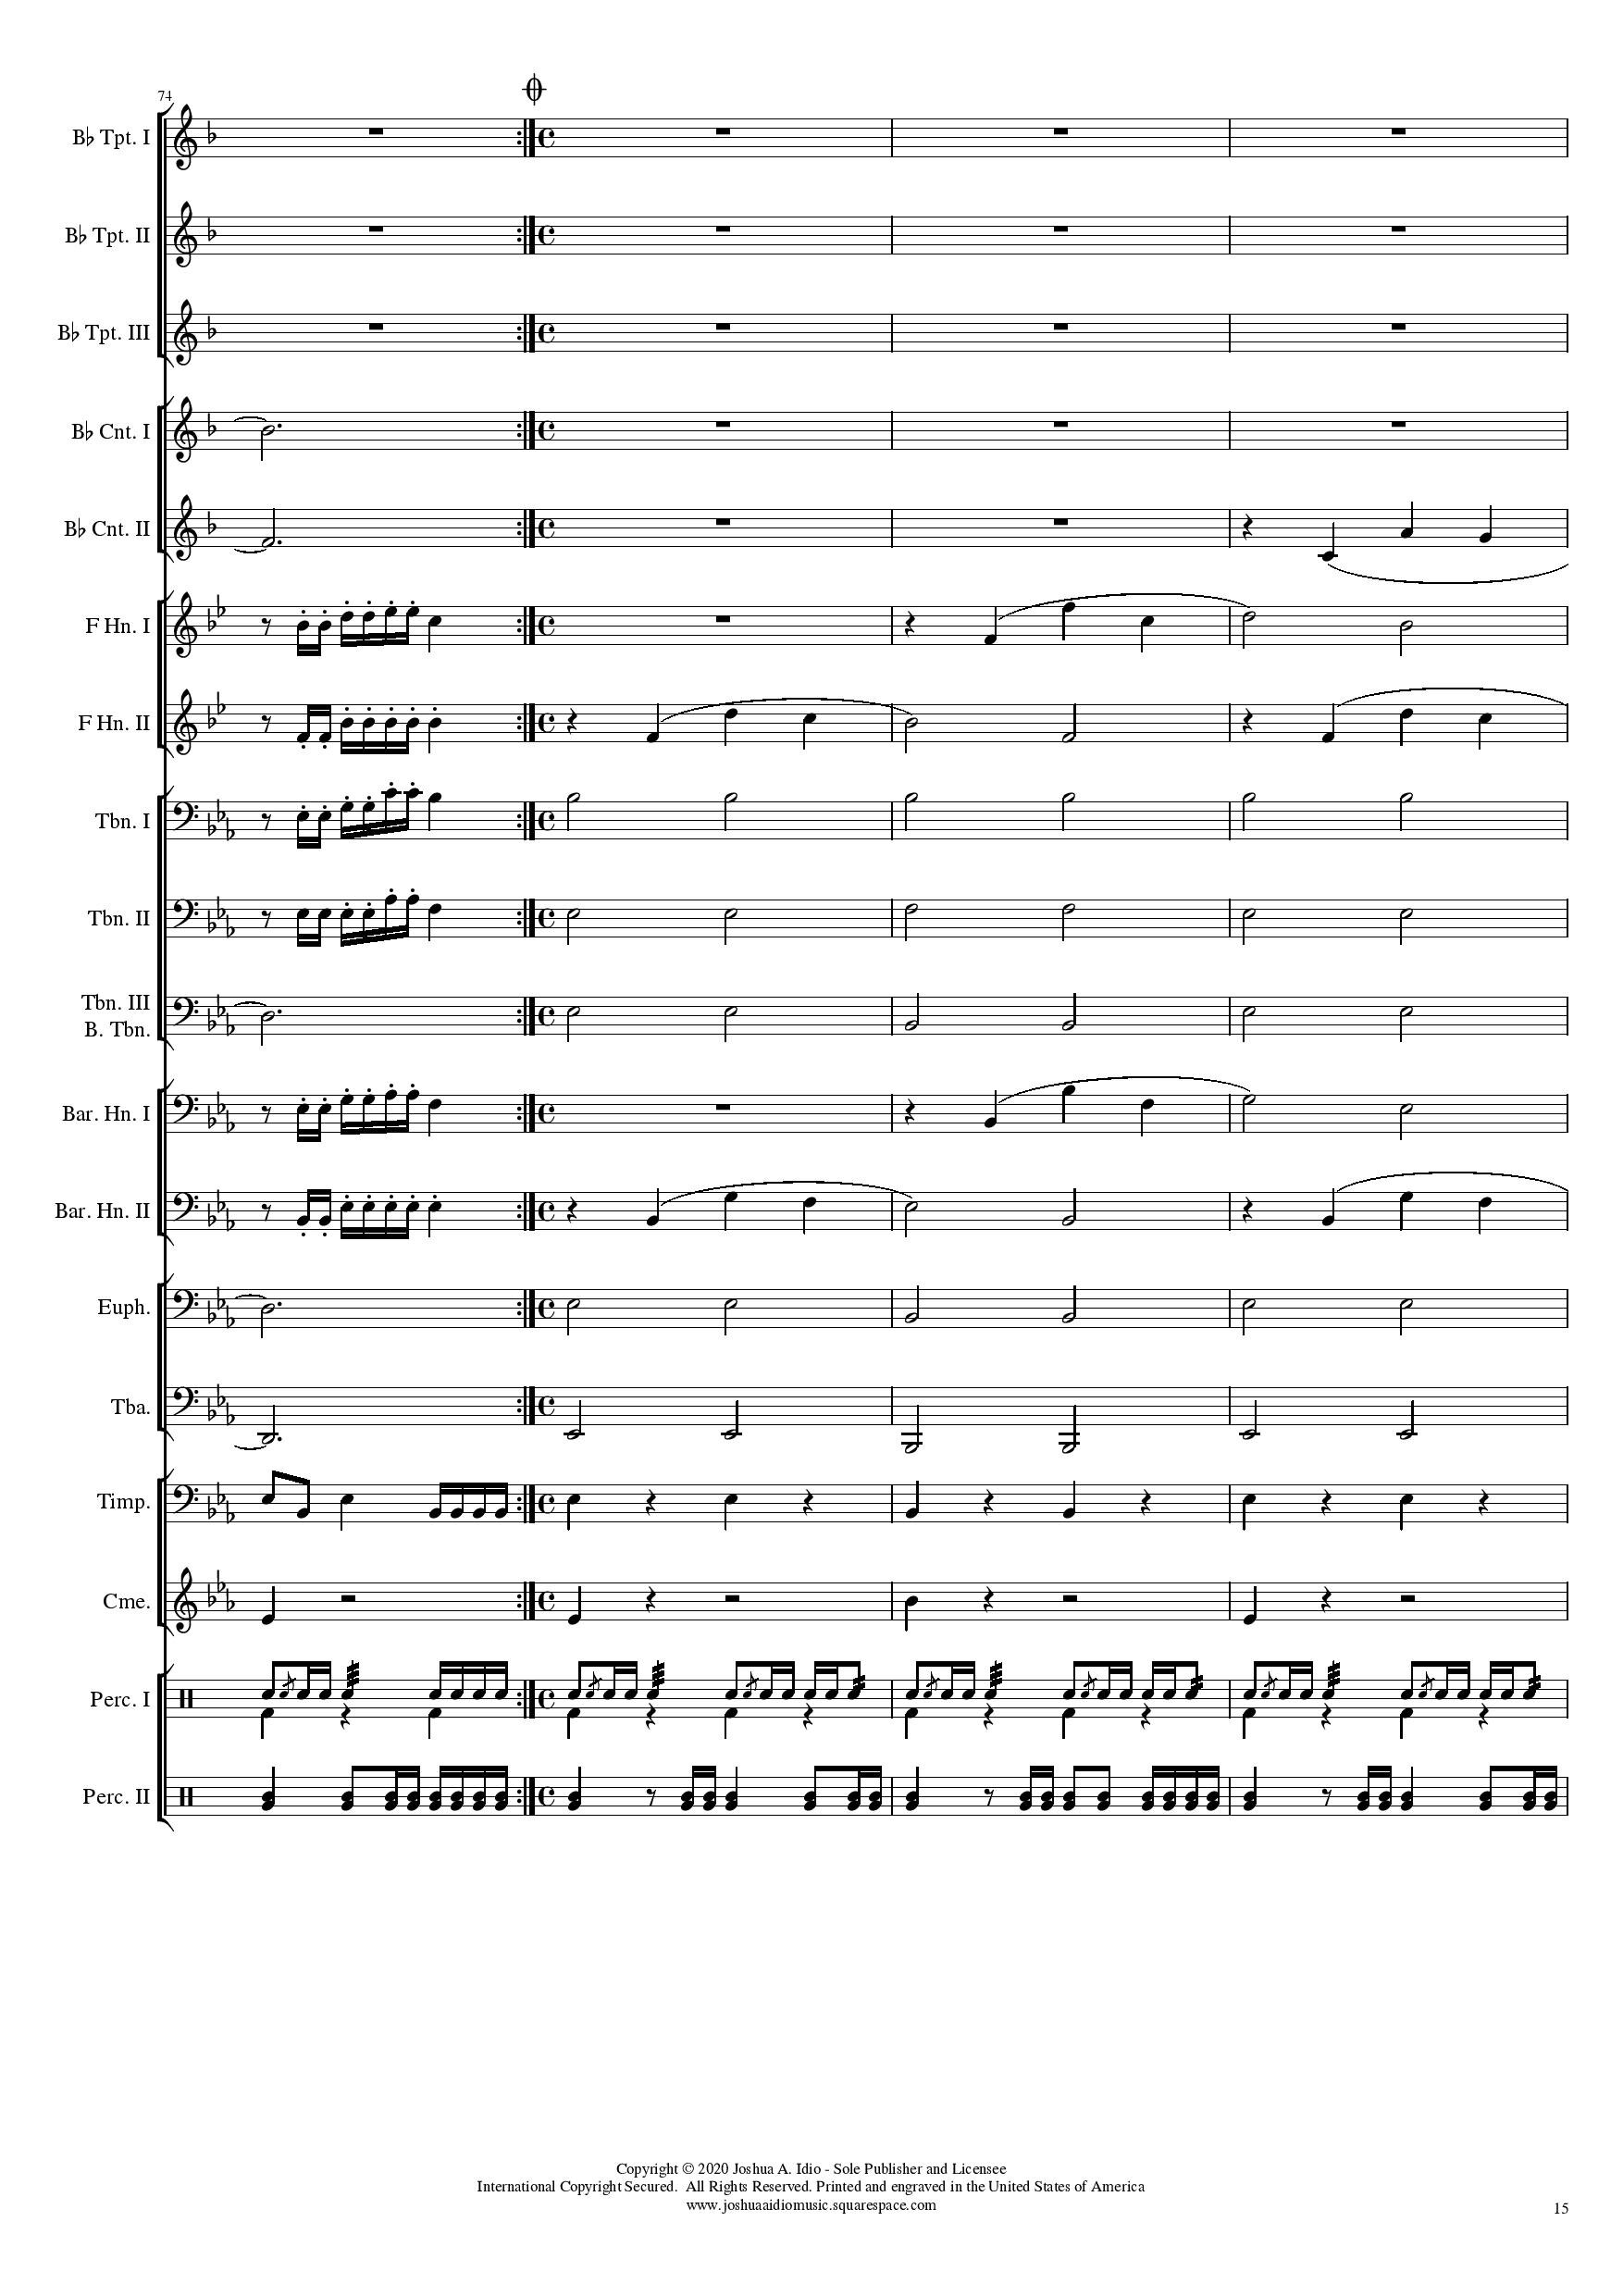 The Procession of Scholars - Conductor s Score-page-015.jpg